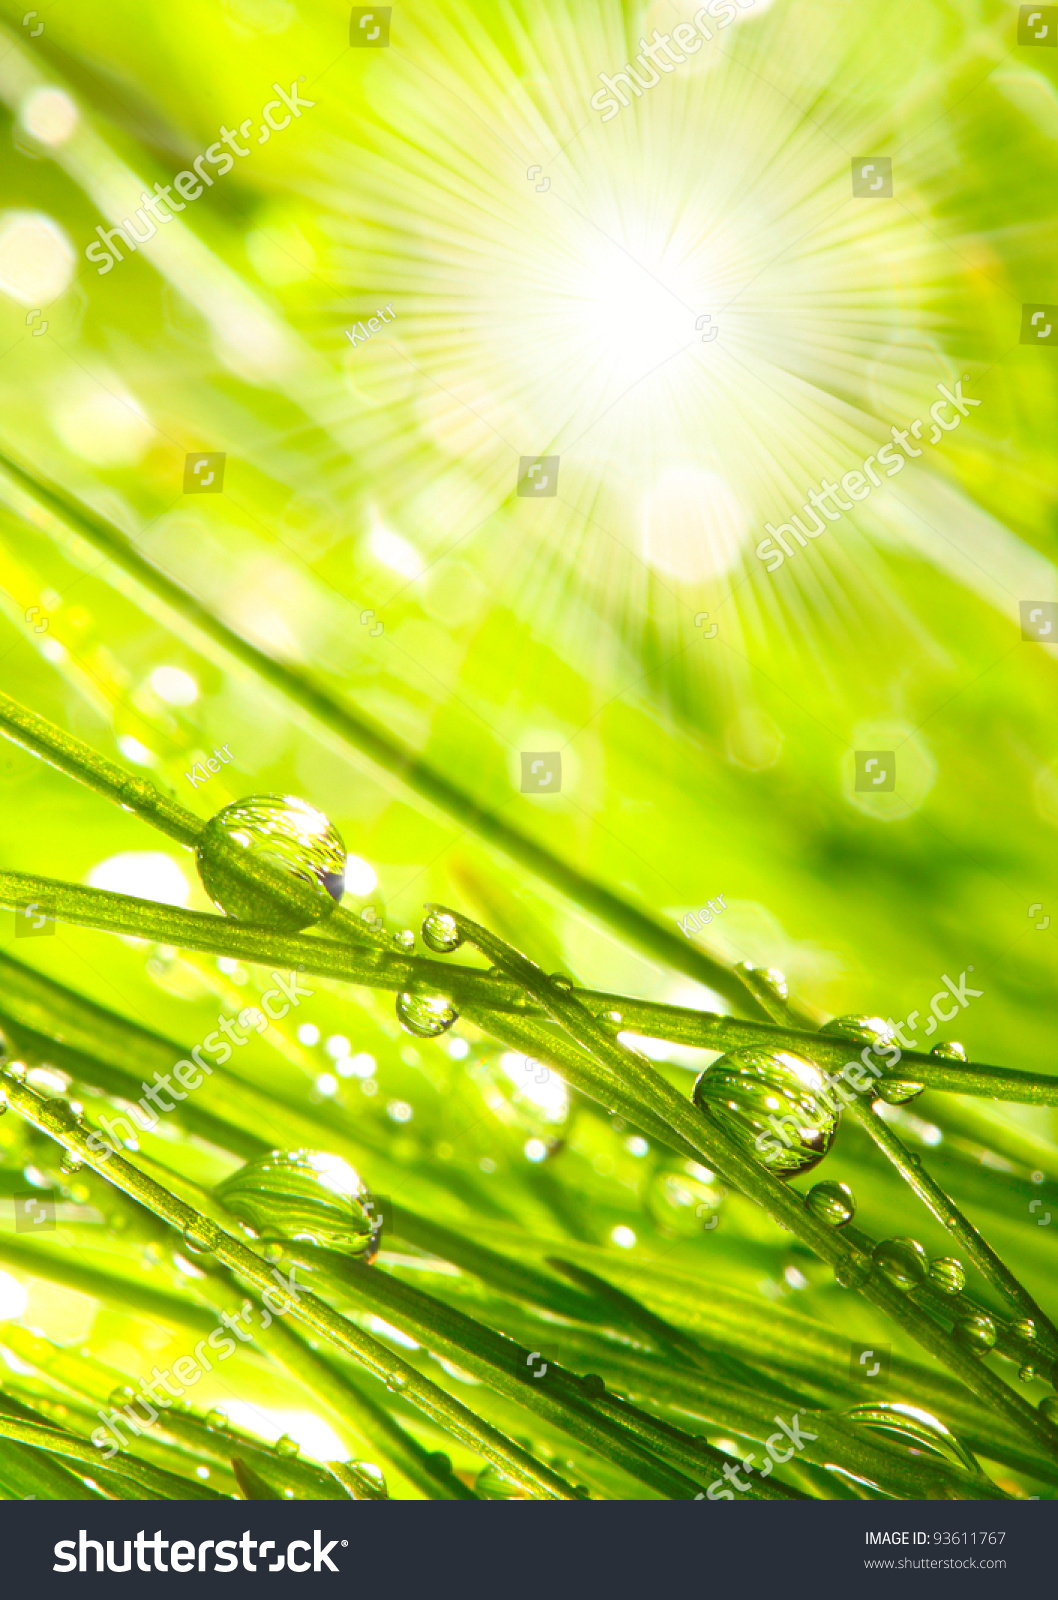 Sunrise And Fresh Dewy Grass. Sunny Day Concept. Natural Background